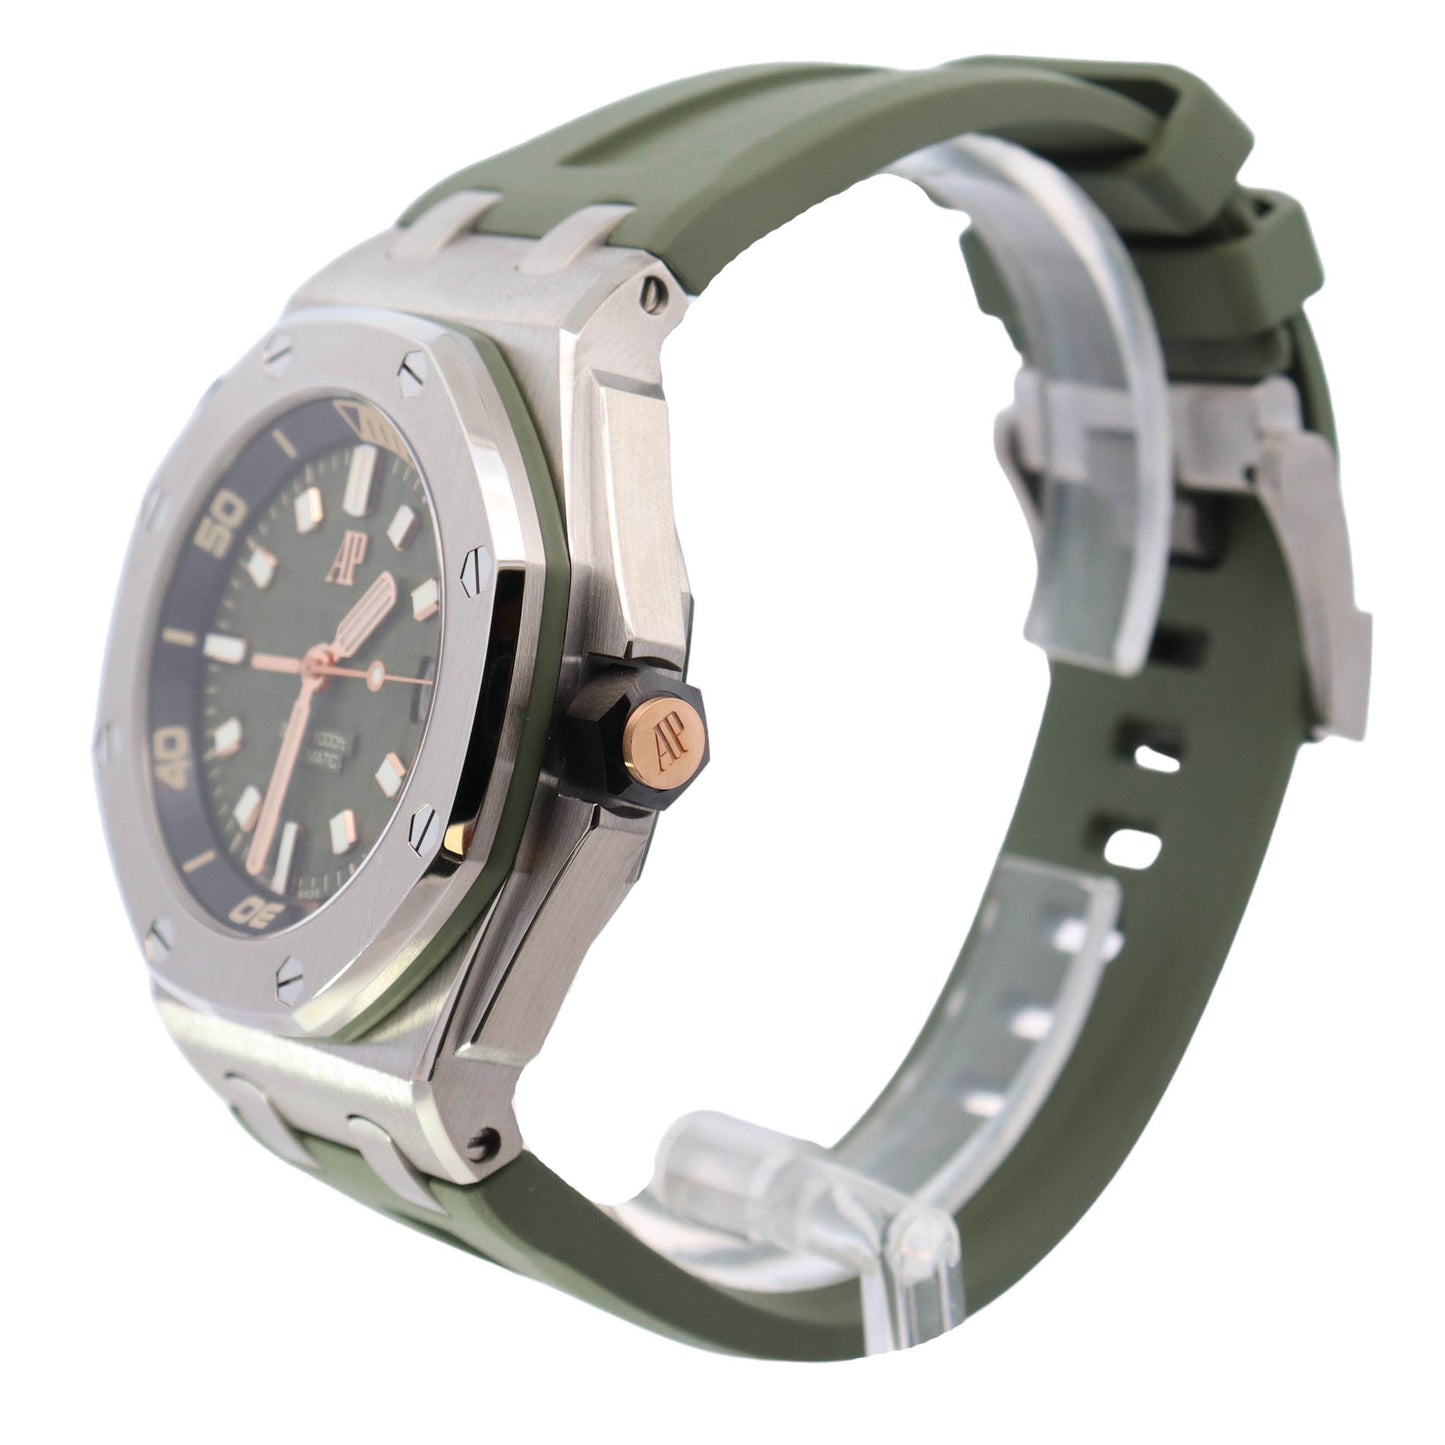 Audemar Piguet Royal Oak Offshore Diver Stainless Steel 42mm Green Stick Dial Watch Reference# 15720ST.OO.A052CA.01 - Happy Jewelers Fine Jewelry Lifetime Warranty